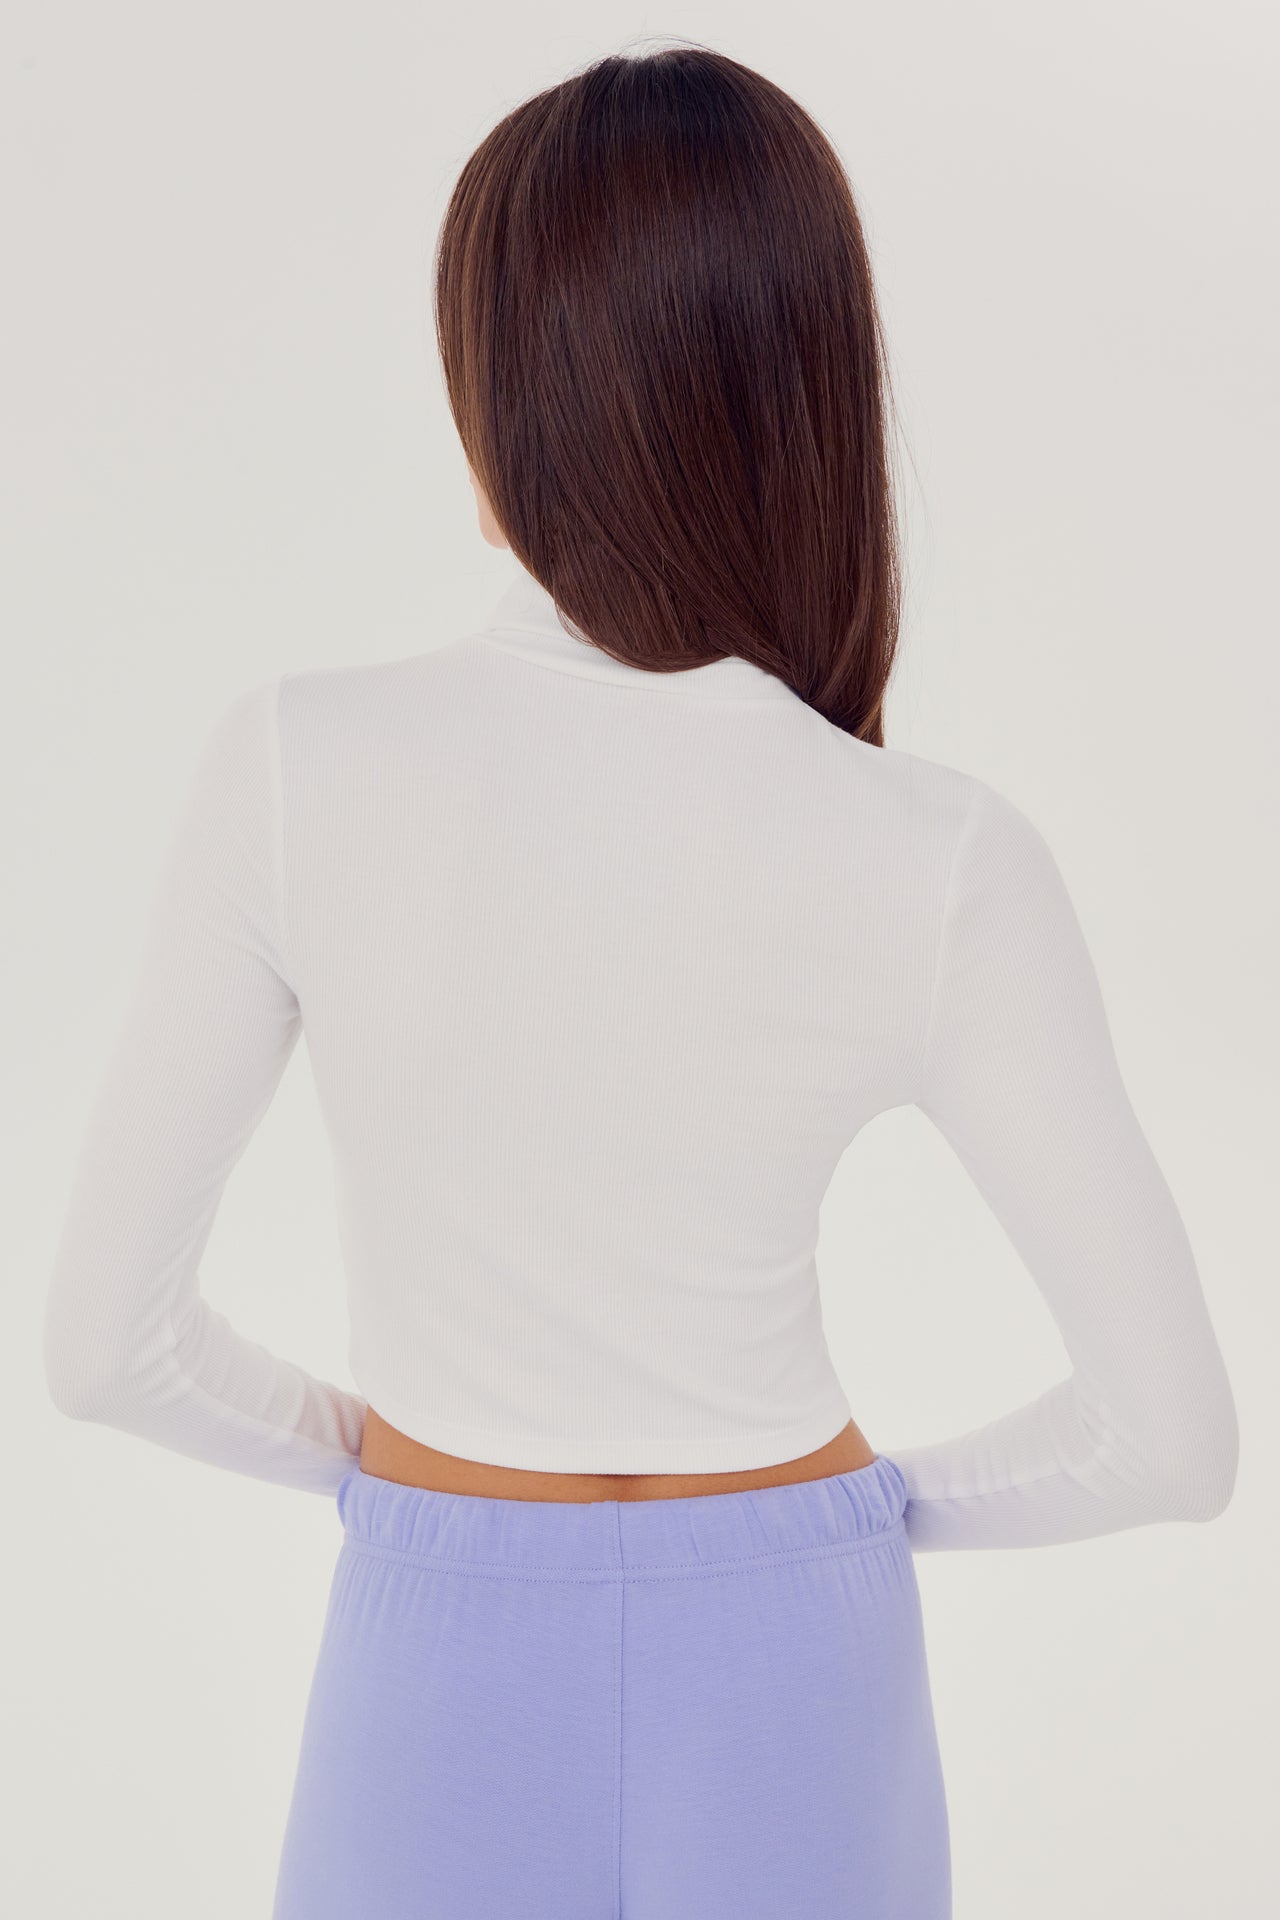 The back view of a woman wearing a SPLITS59 Jackson Rib Cropped Turtleneck in White and high waist purple leggings.